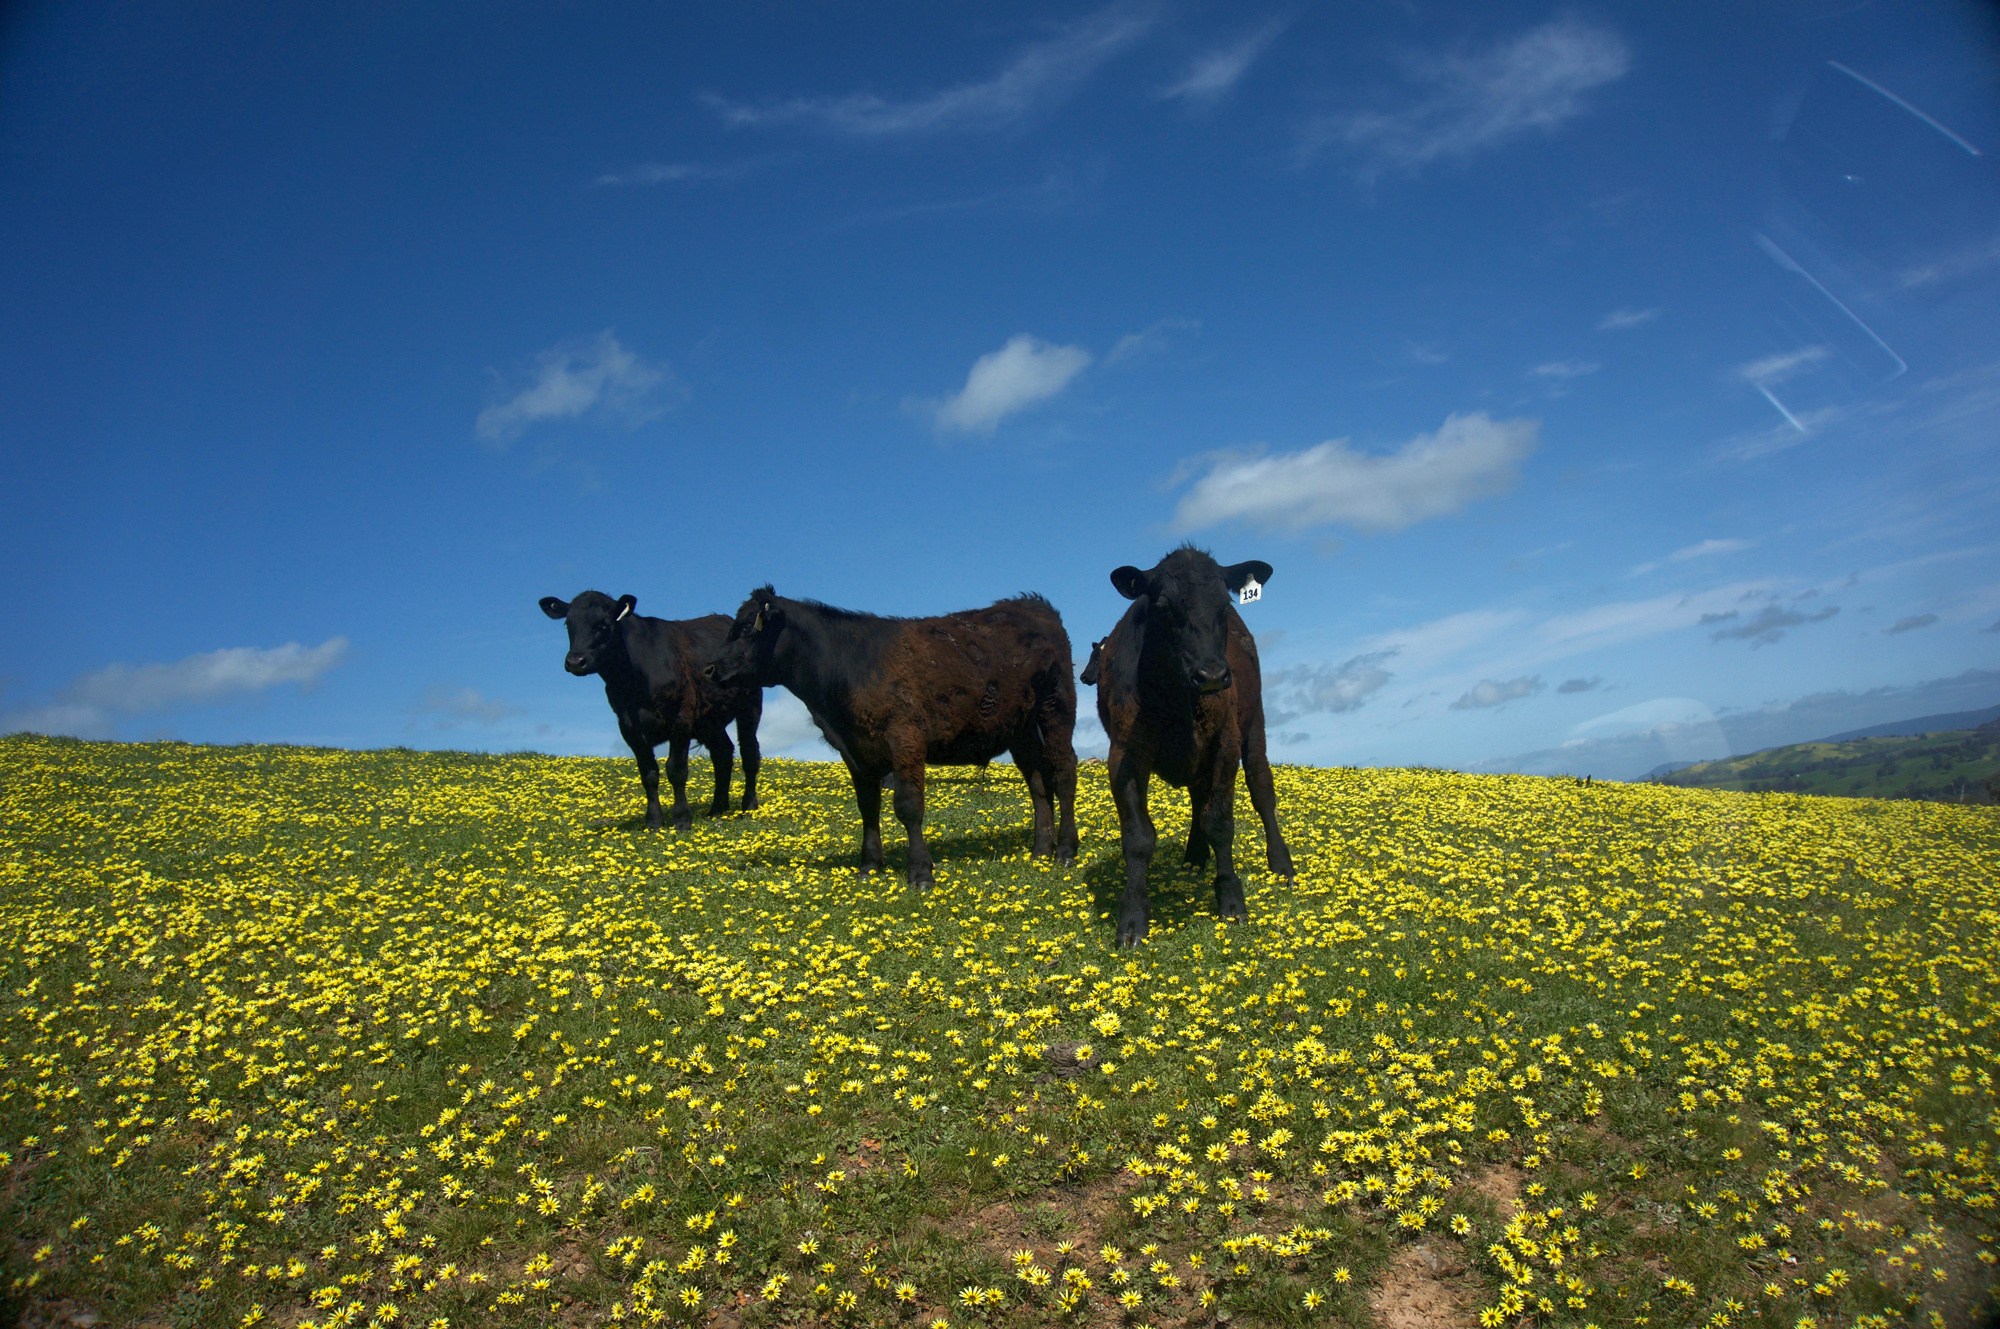 Three cows on a hillside, one staring straight at the camera.